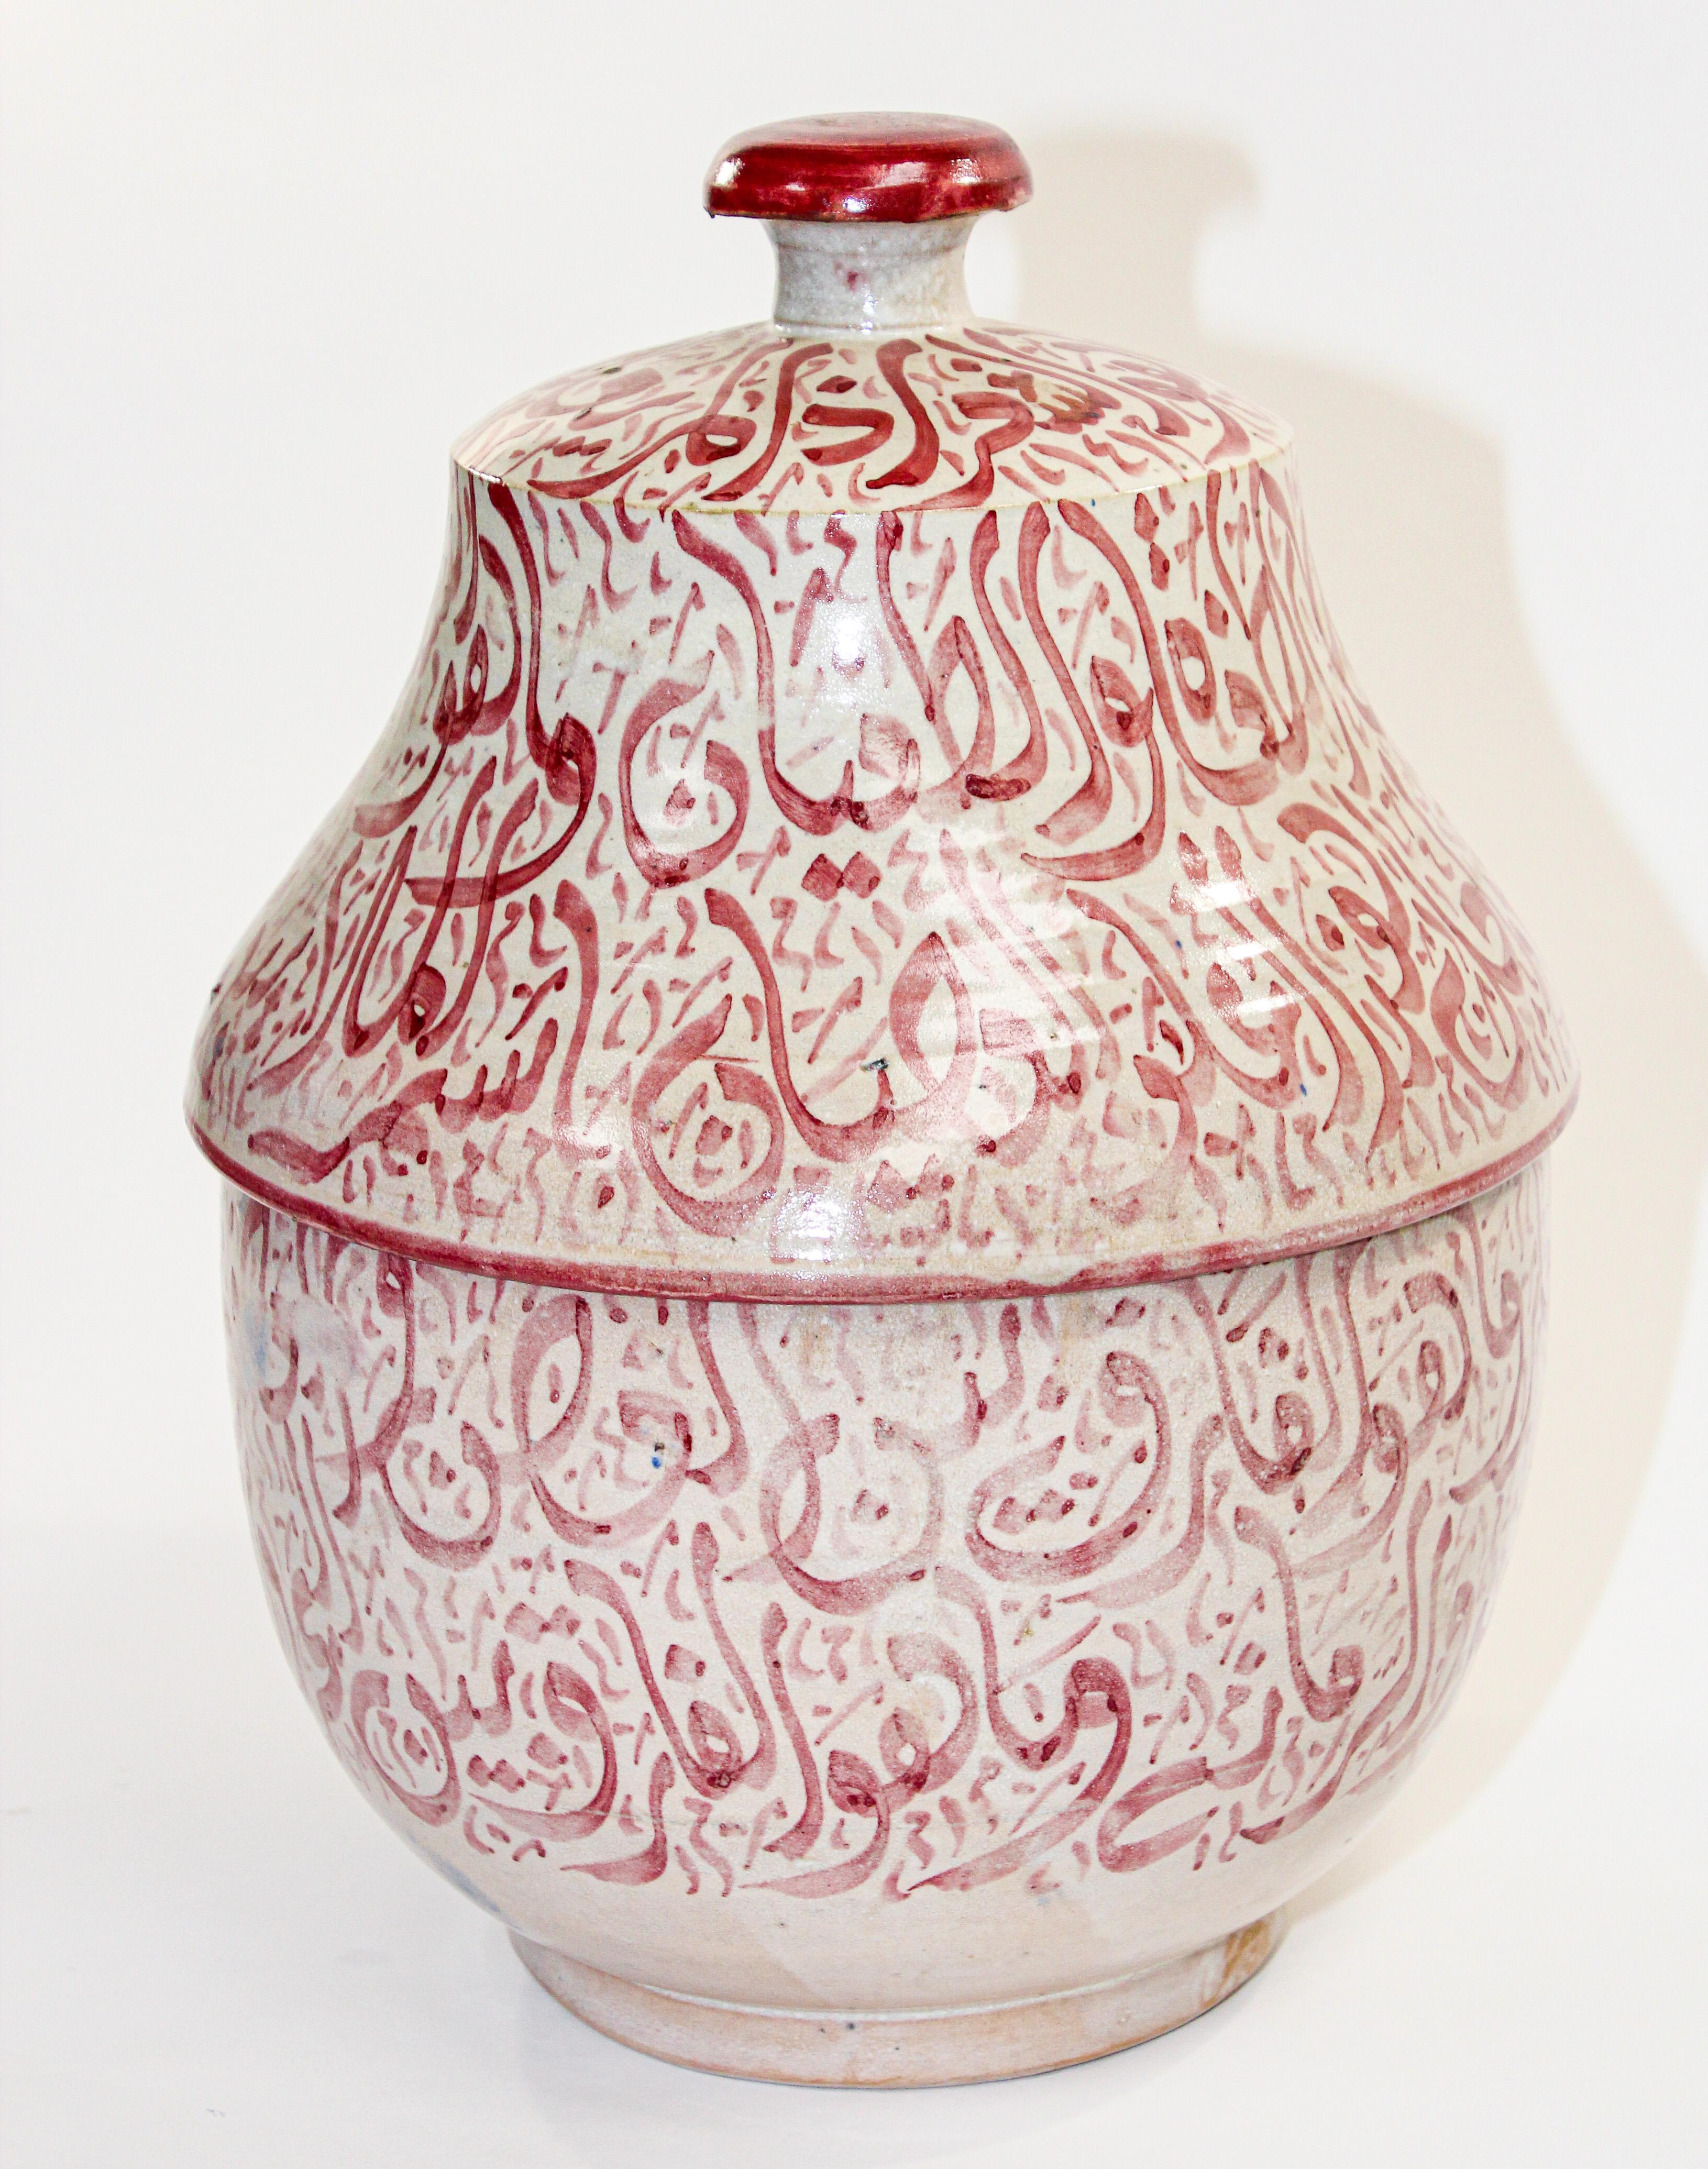 Moroccan Ceramic Lidded Urn from Fez with Arabic Calligraphy Pink Writing For Sale 5